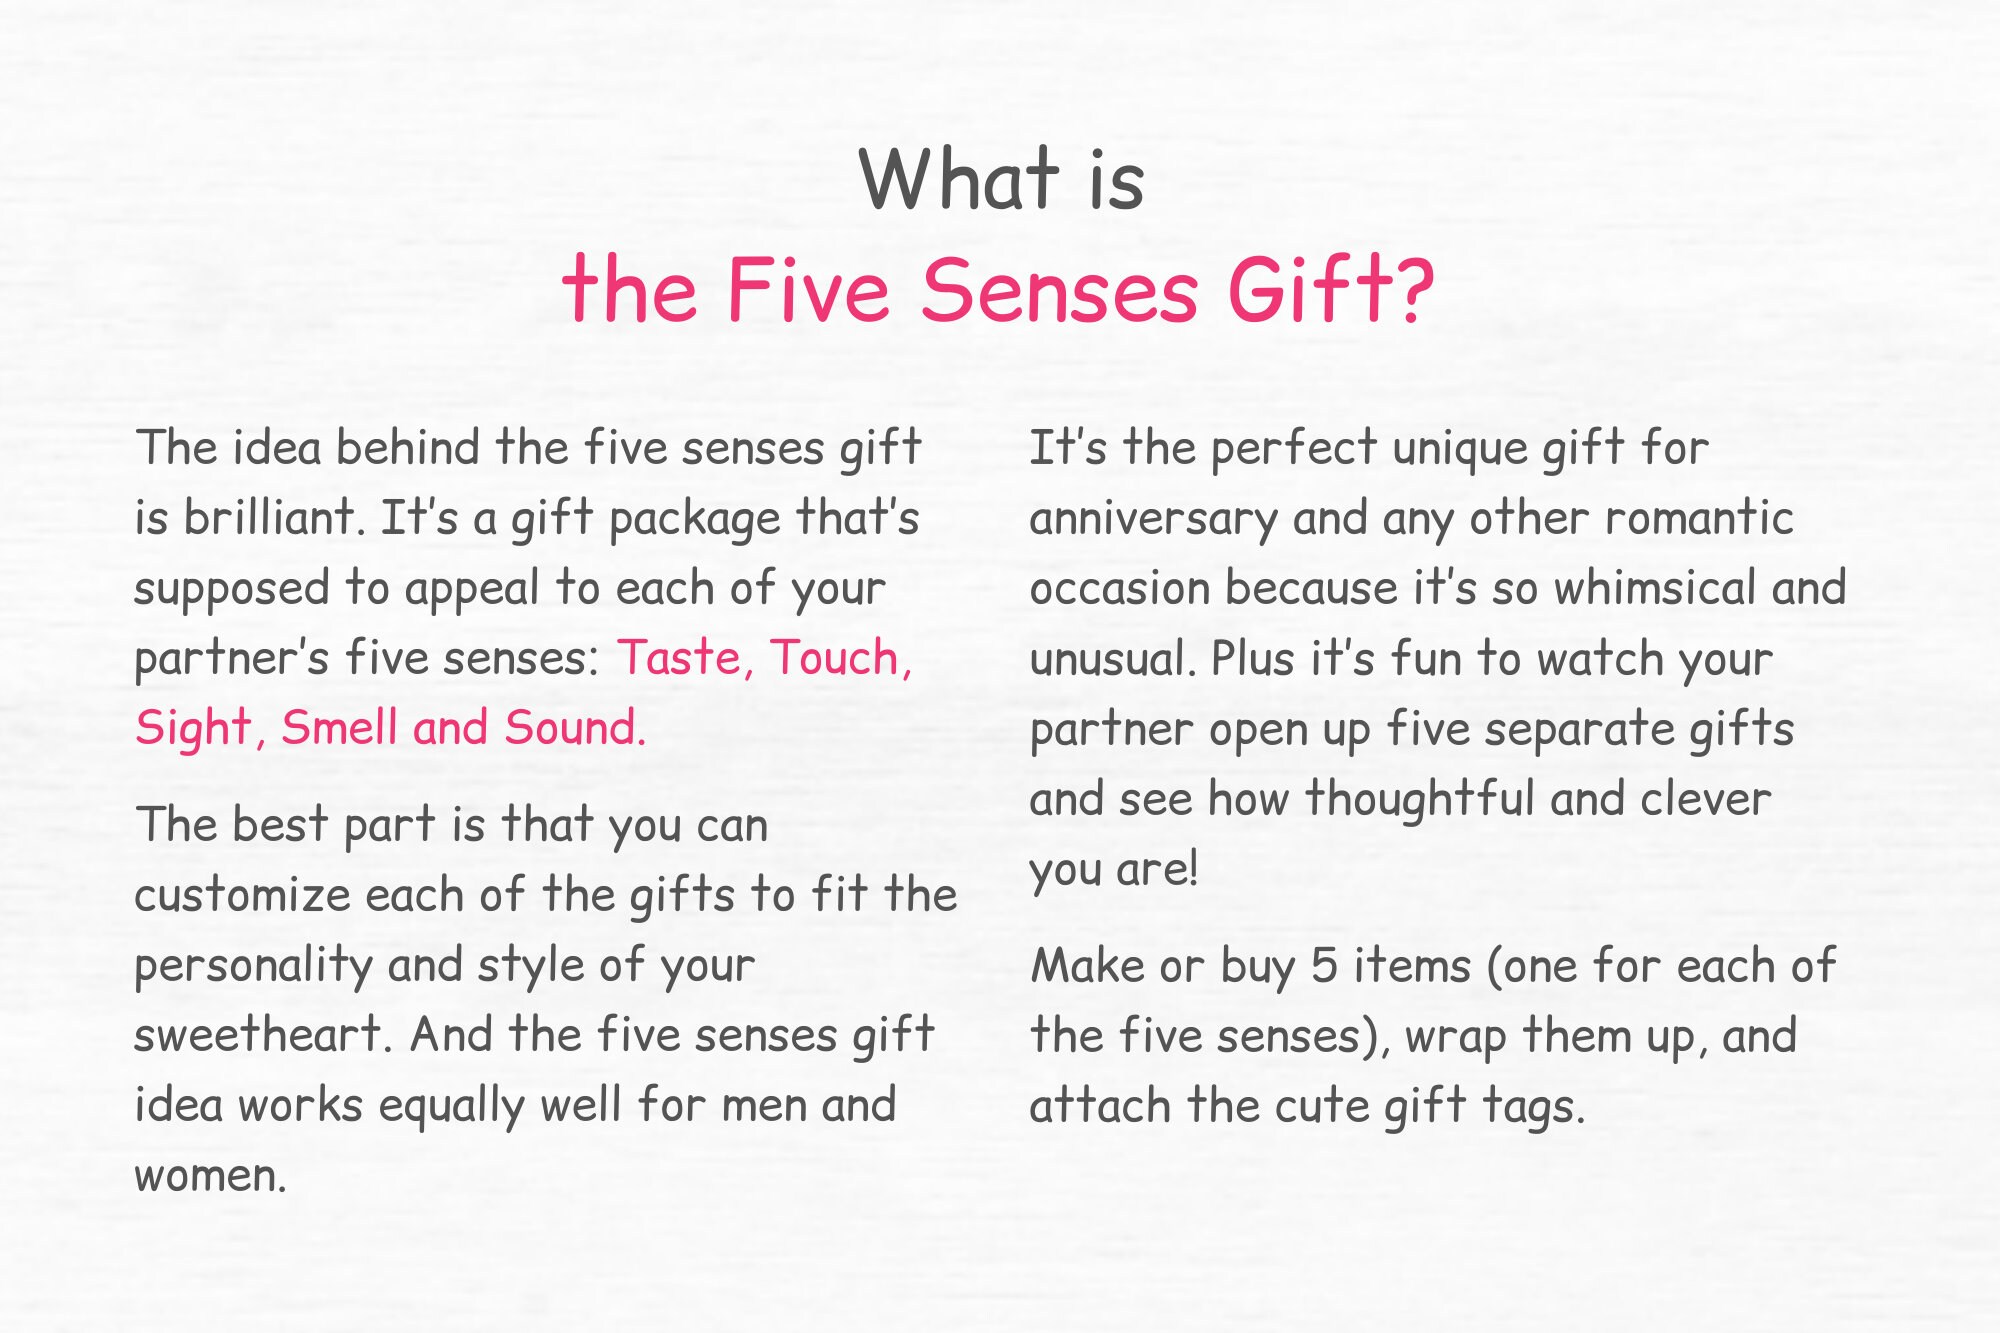 5 Senses Gift Tags One Year Anniversary Gifts for Boyfriend 